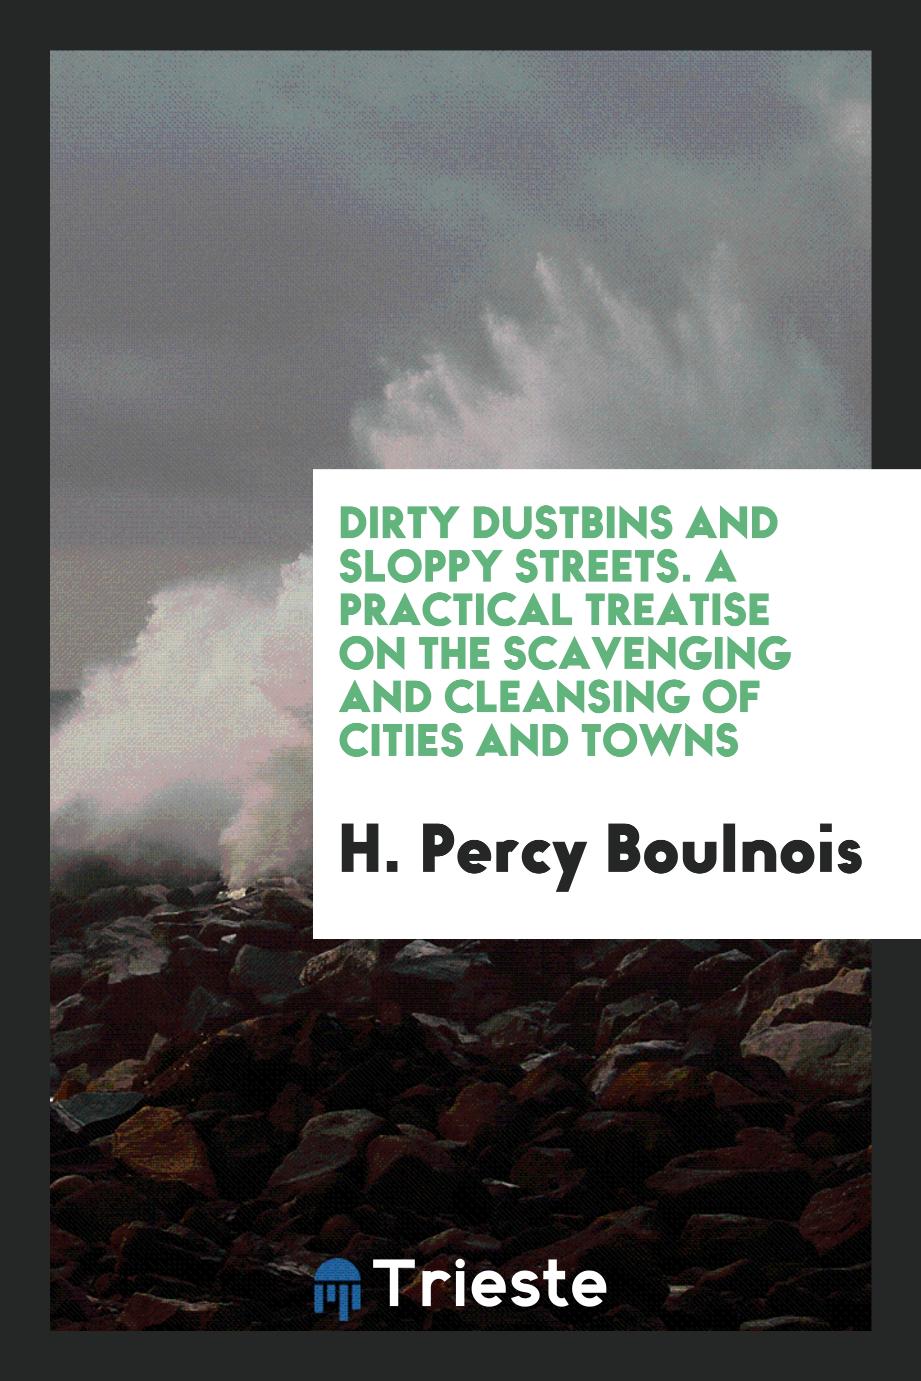 Dirty Dustbins and Sloppy Streets. A Practical Treatise on the Scavenging and Cleansing of Cities and Towns